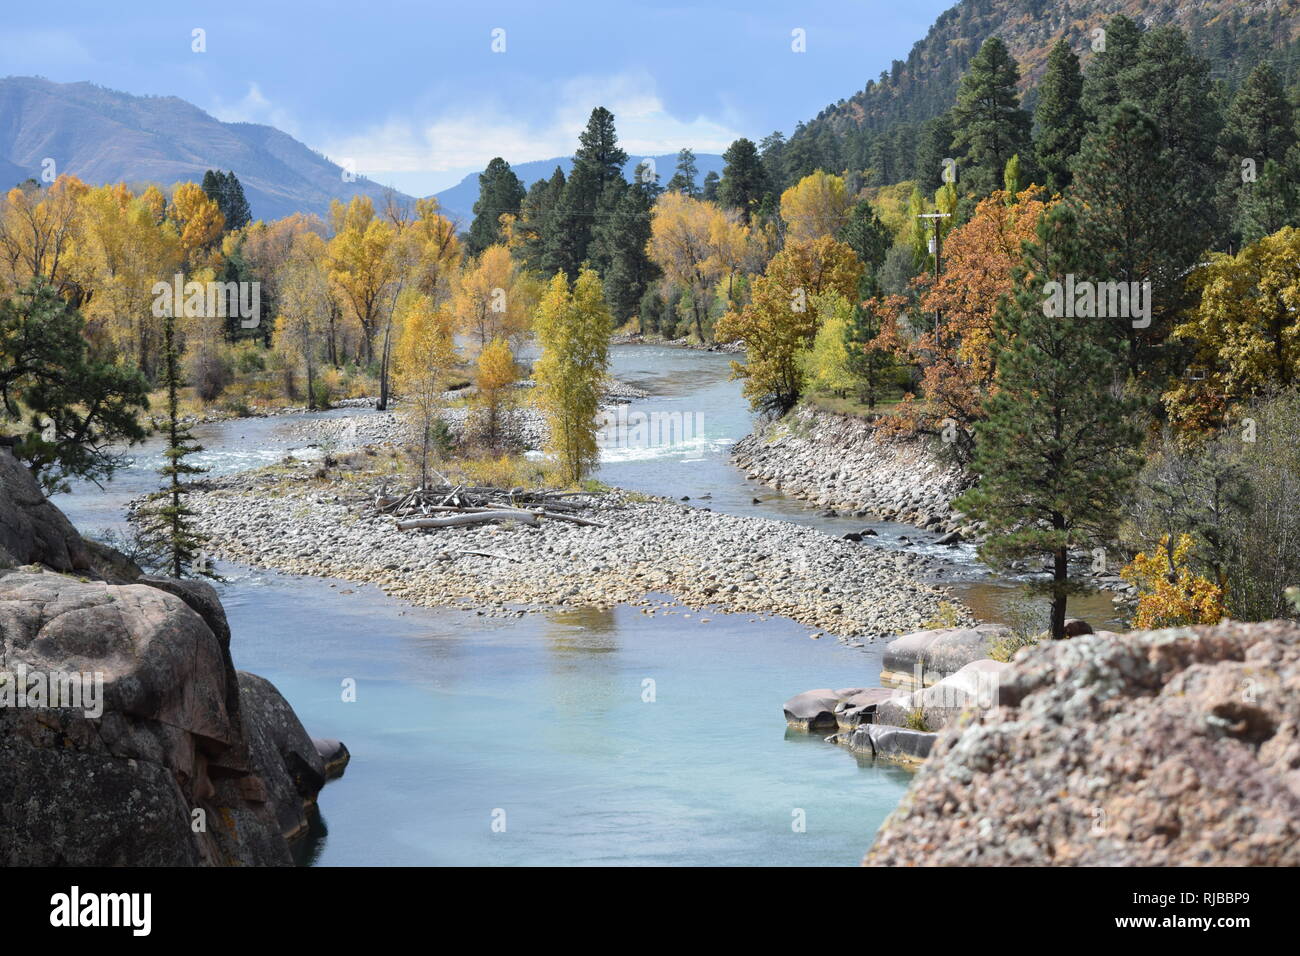 The Animas river snakes through a gorgeous setting just north of Durango, Colorado while leaves show fall colors Stock Photo